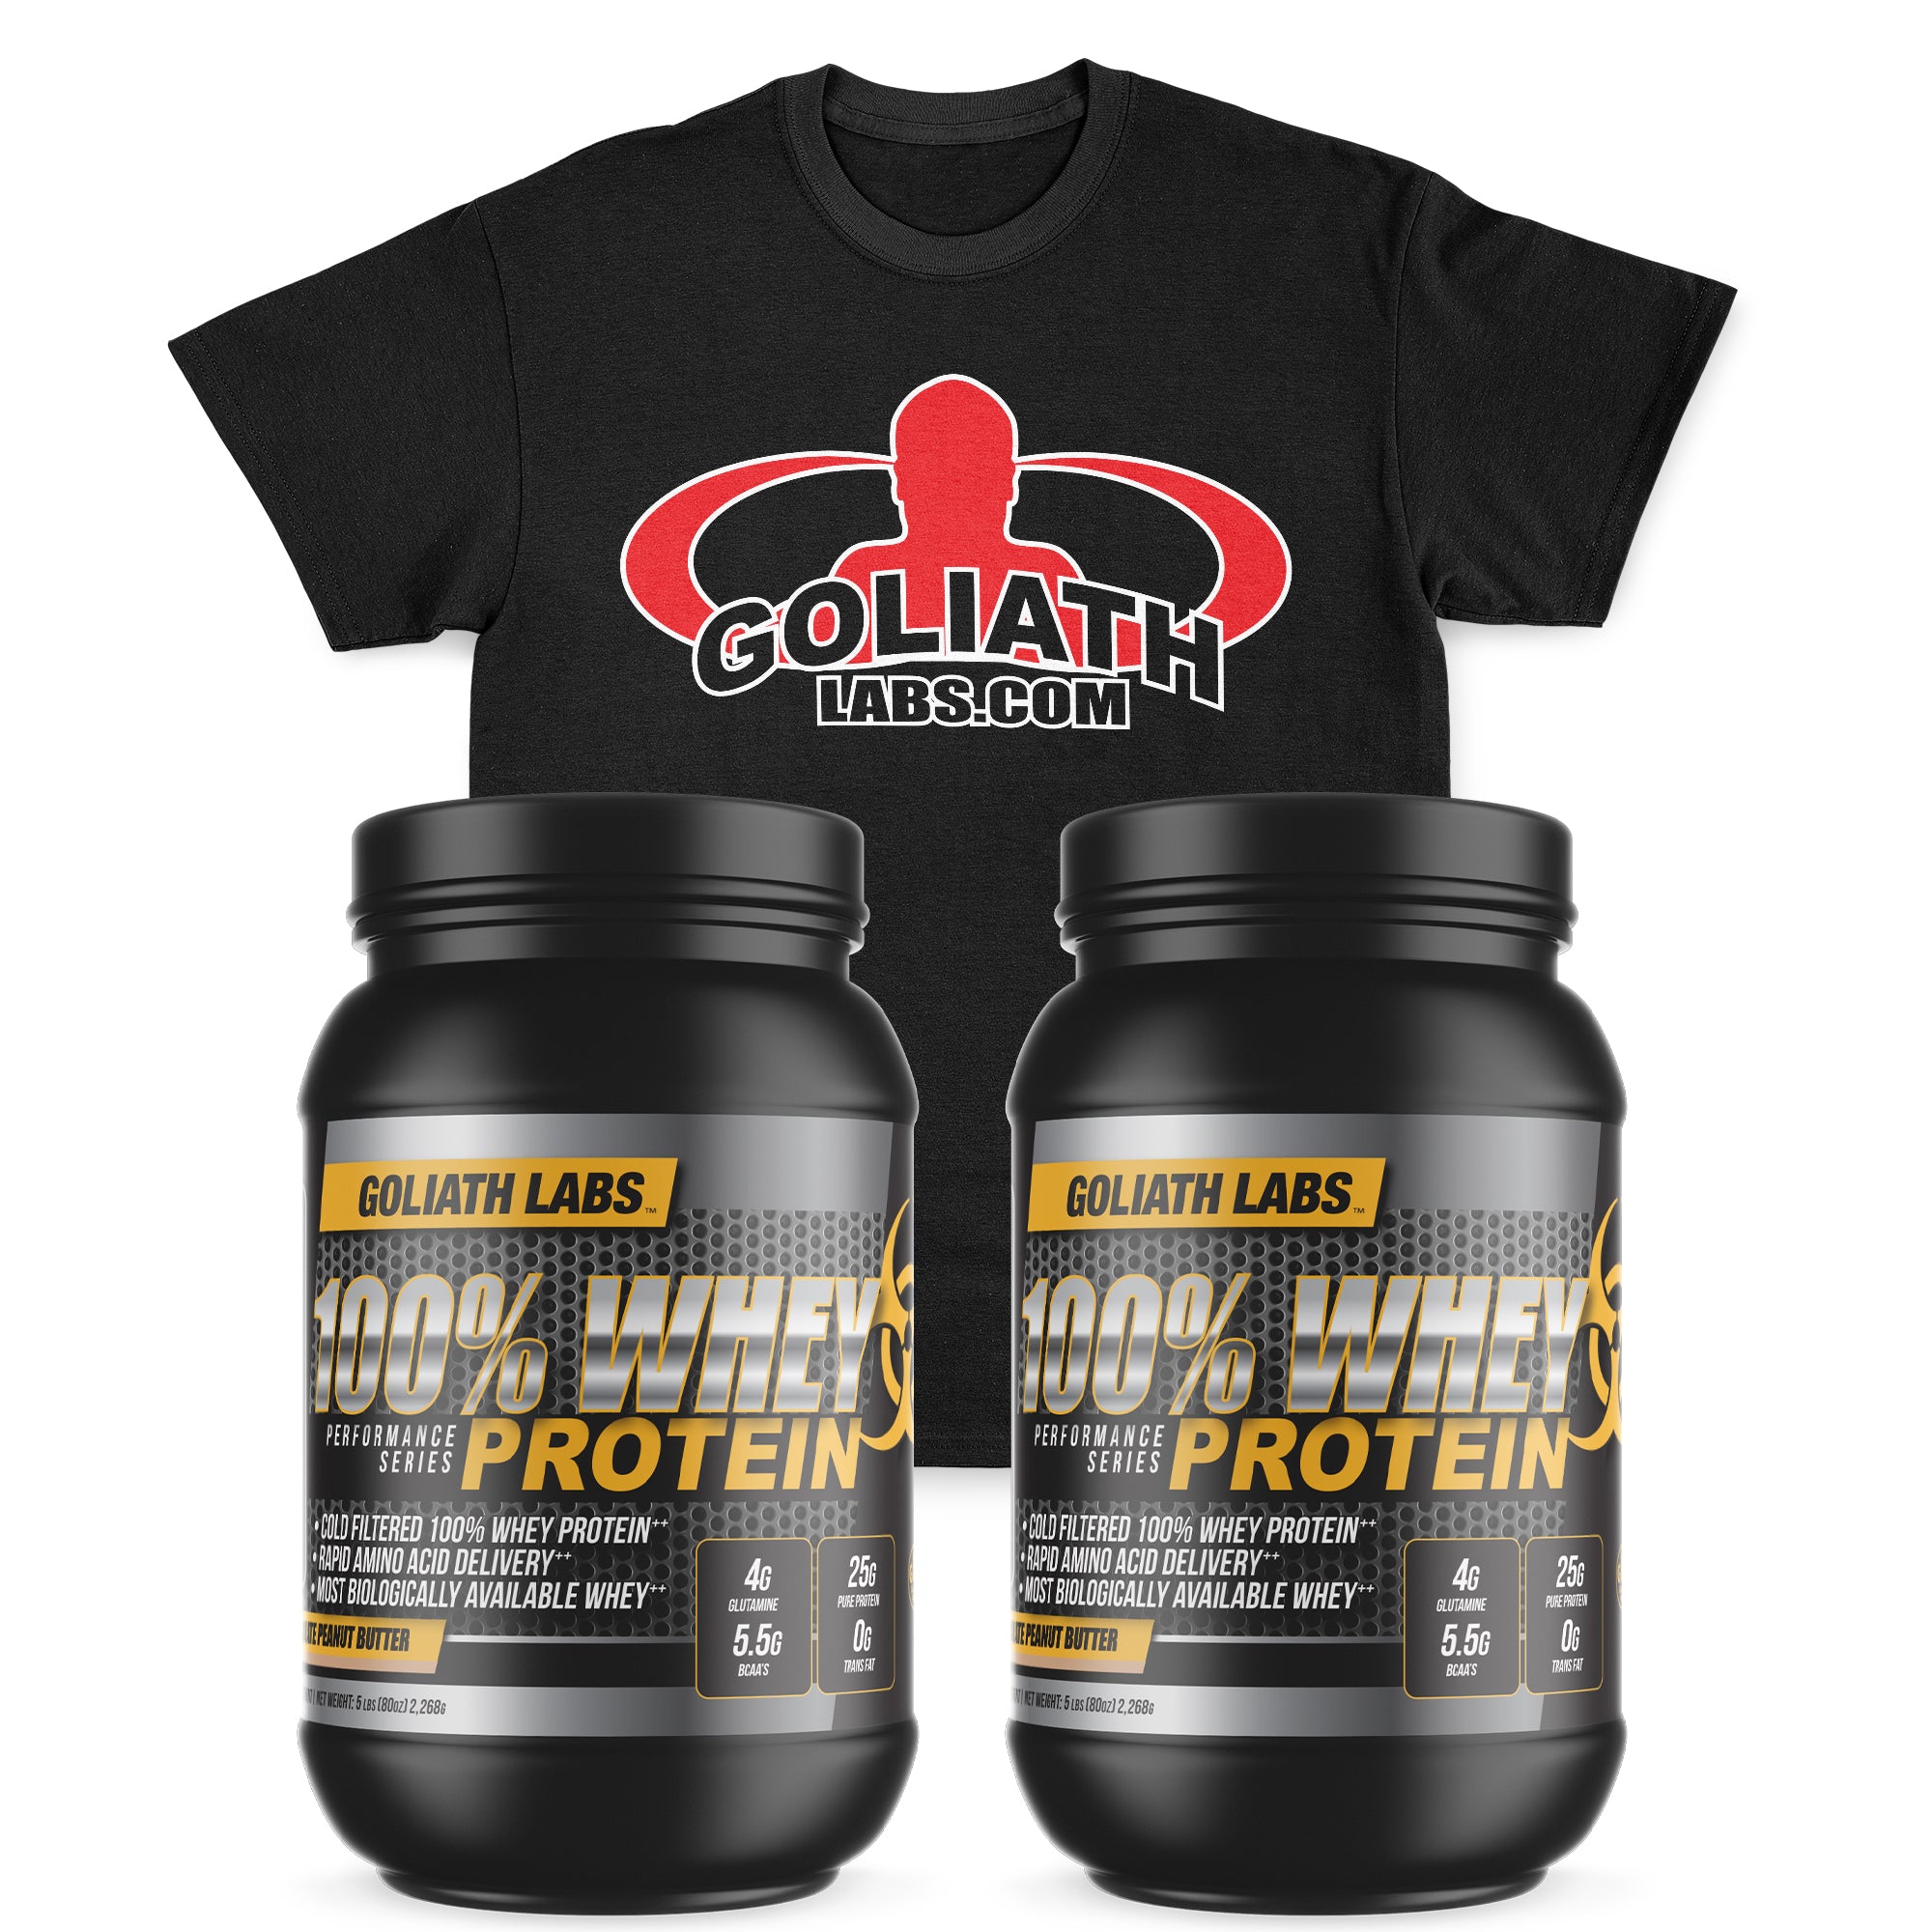 2 x 5 lbs 100% Whey Protein & T-Shirt Combo